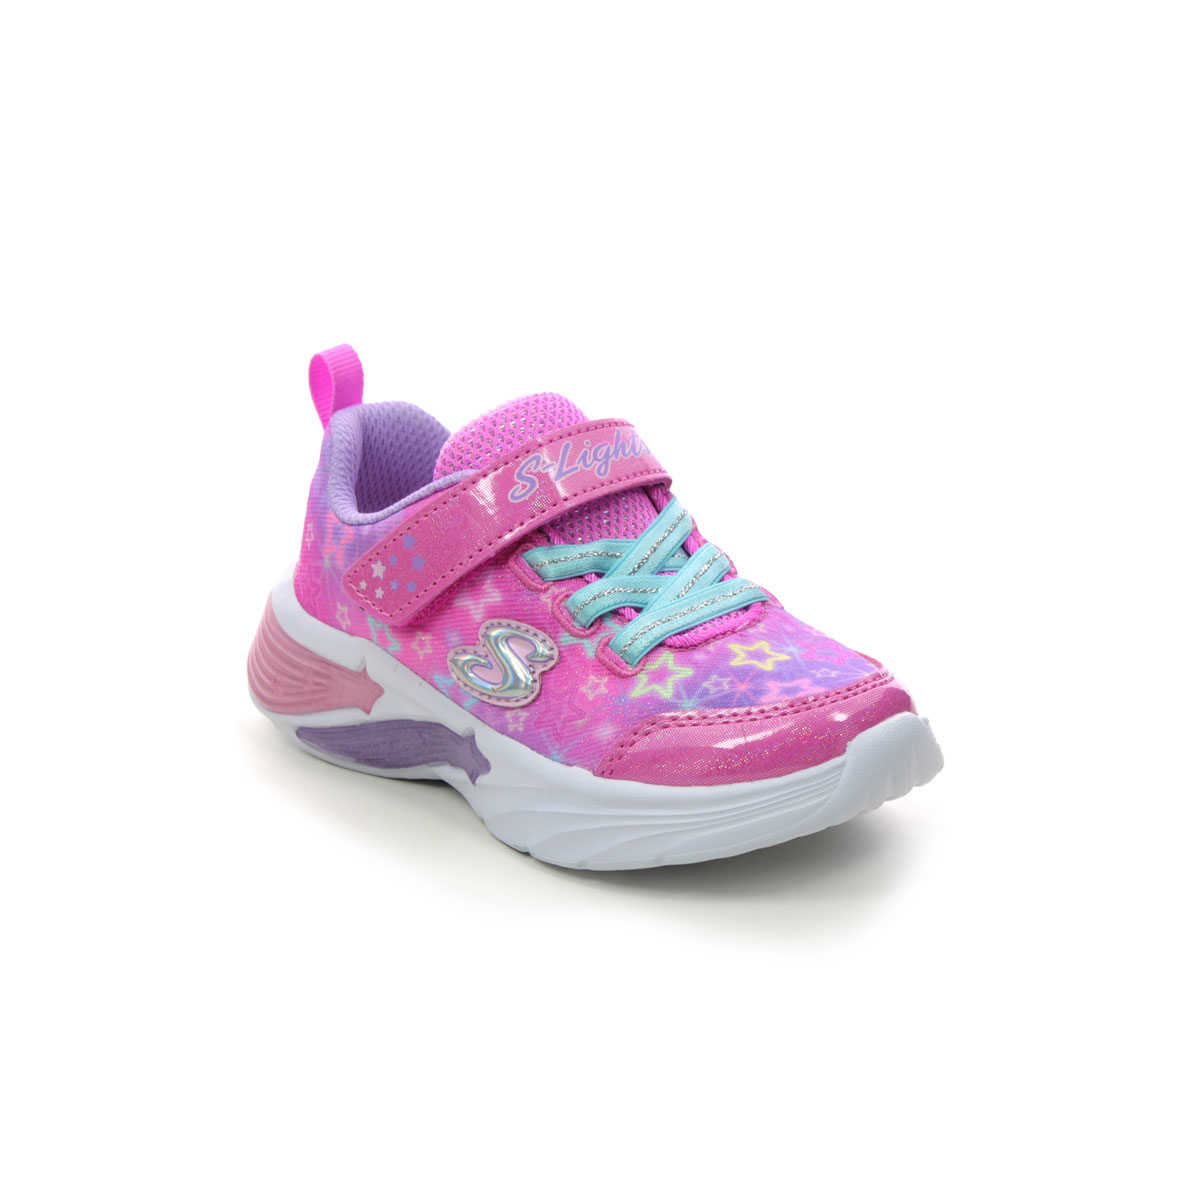 Skechers Star Sparks Inf Pink Kids Girls Trainers 302324N In Size 25 In Plain Pink